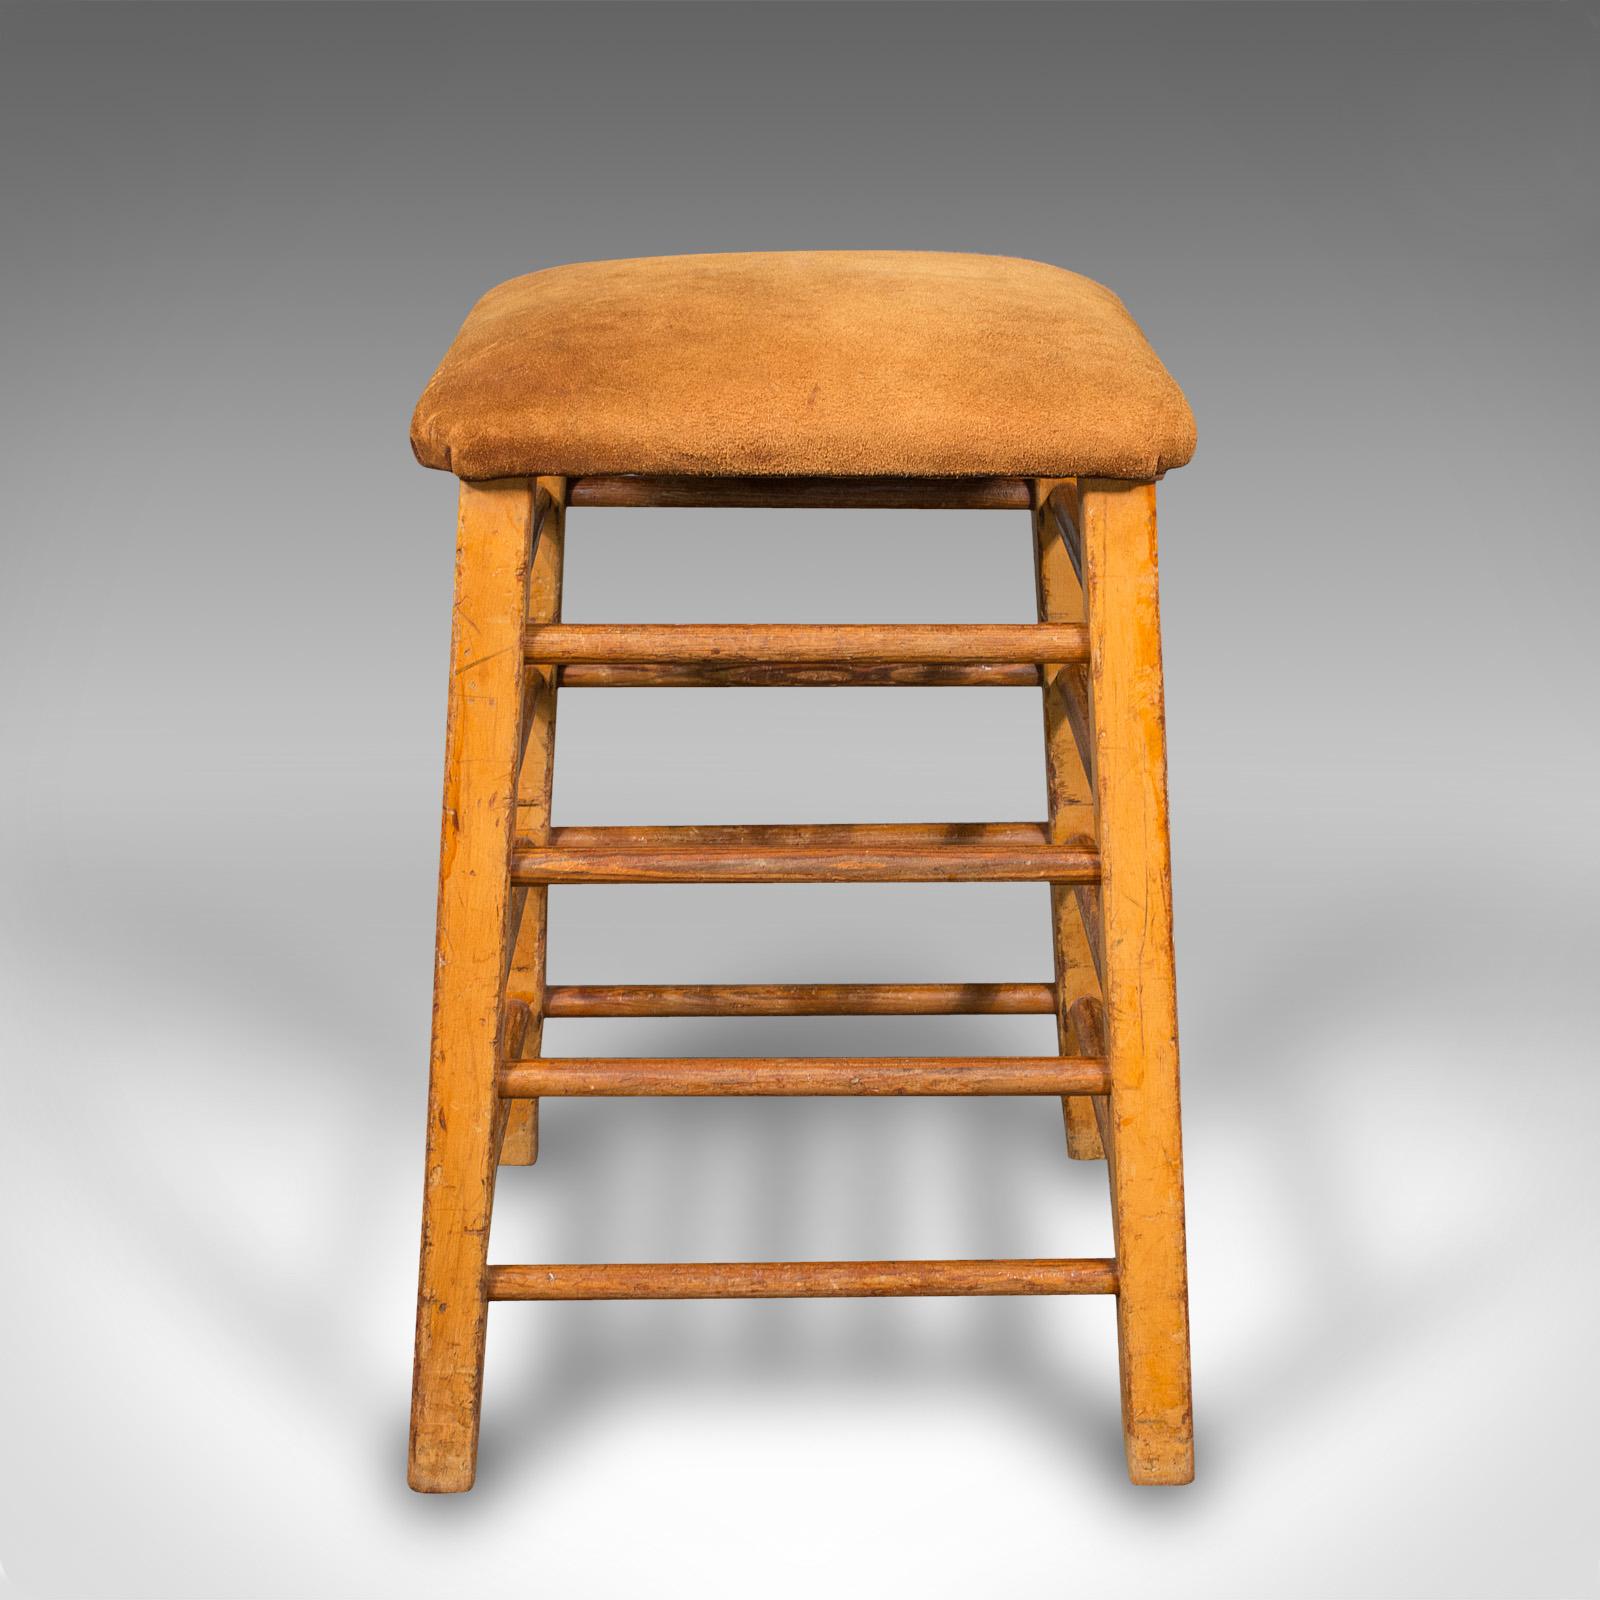 This is a large vintage artist's stool. An English, pitch pine and suede leather gym or lab seat, dating to the mid 20th century, circa 1960.

Generously sized, ideal for longer art sessions
Displays a desirable aged patina throughout
Pitch pine